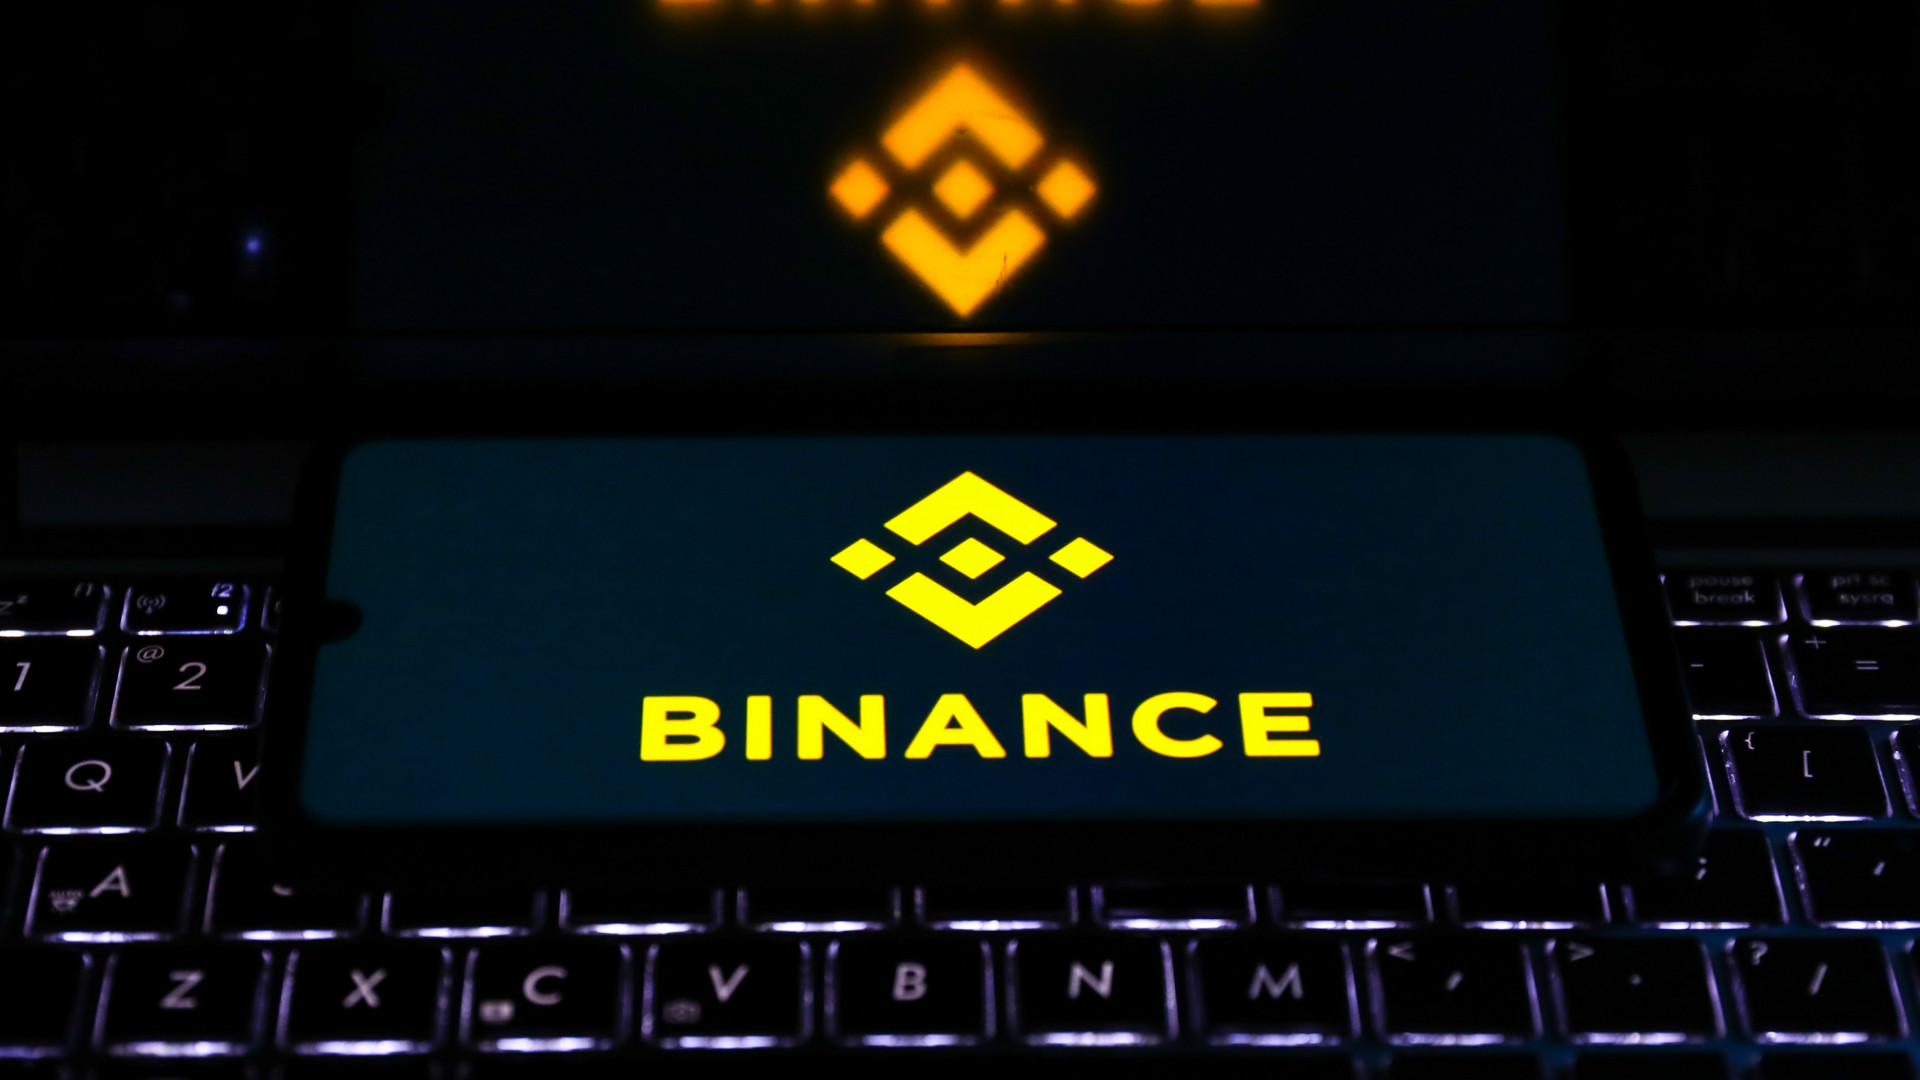 Binance will continue to operate in Canada after reaching an agreement with the local regulator